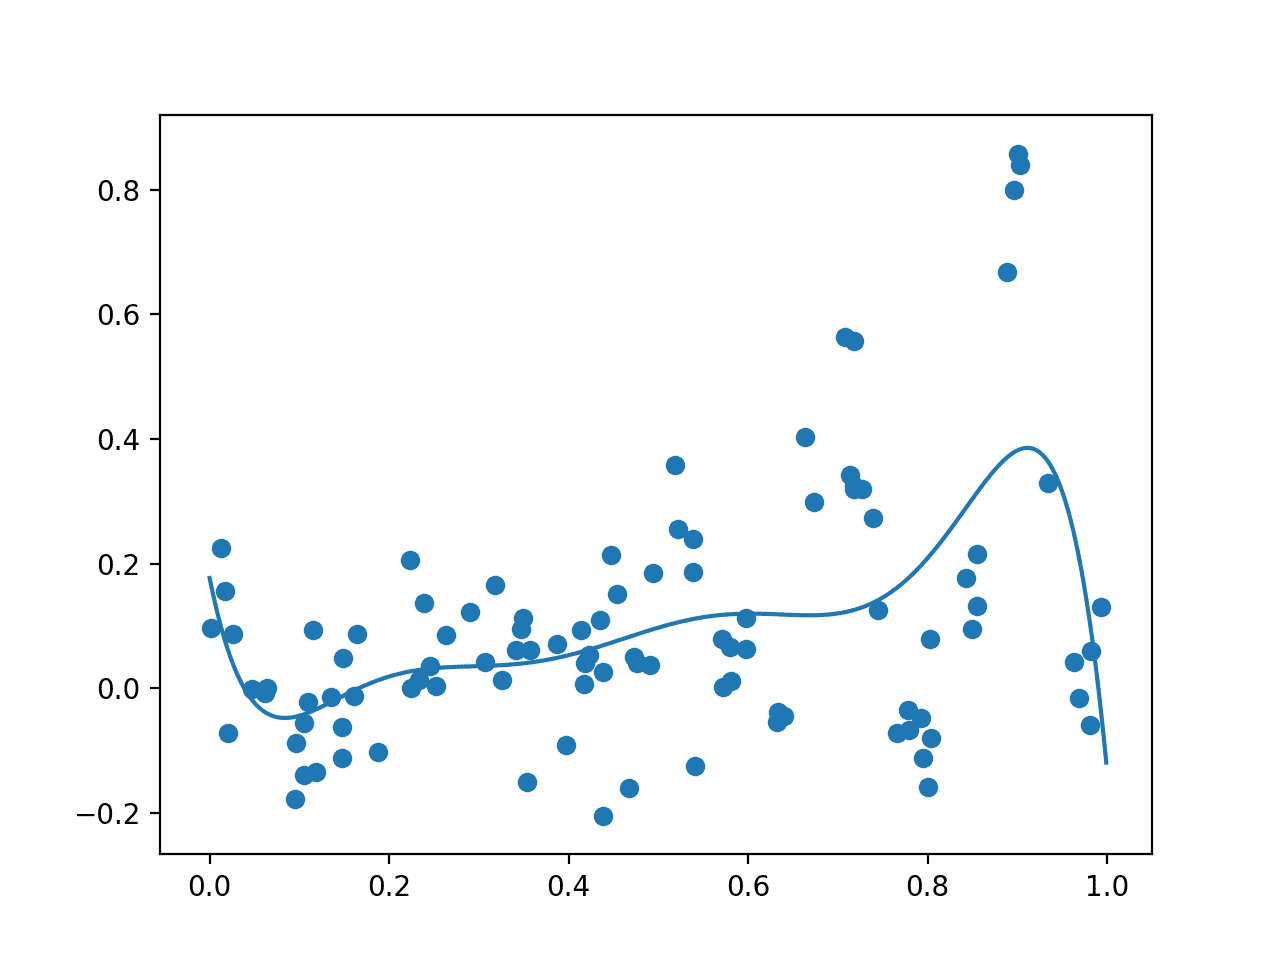 Plot of Initial Sample (dots) and Surrogate Function Across the Domain (line).